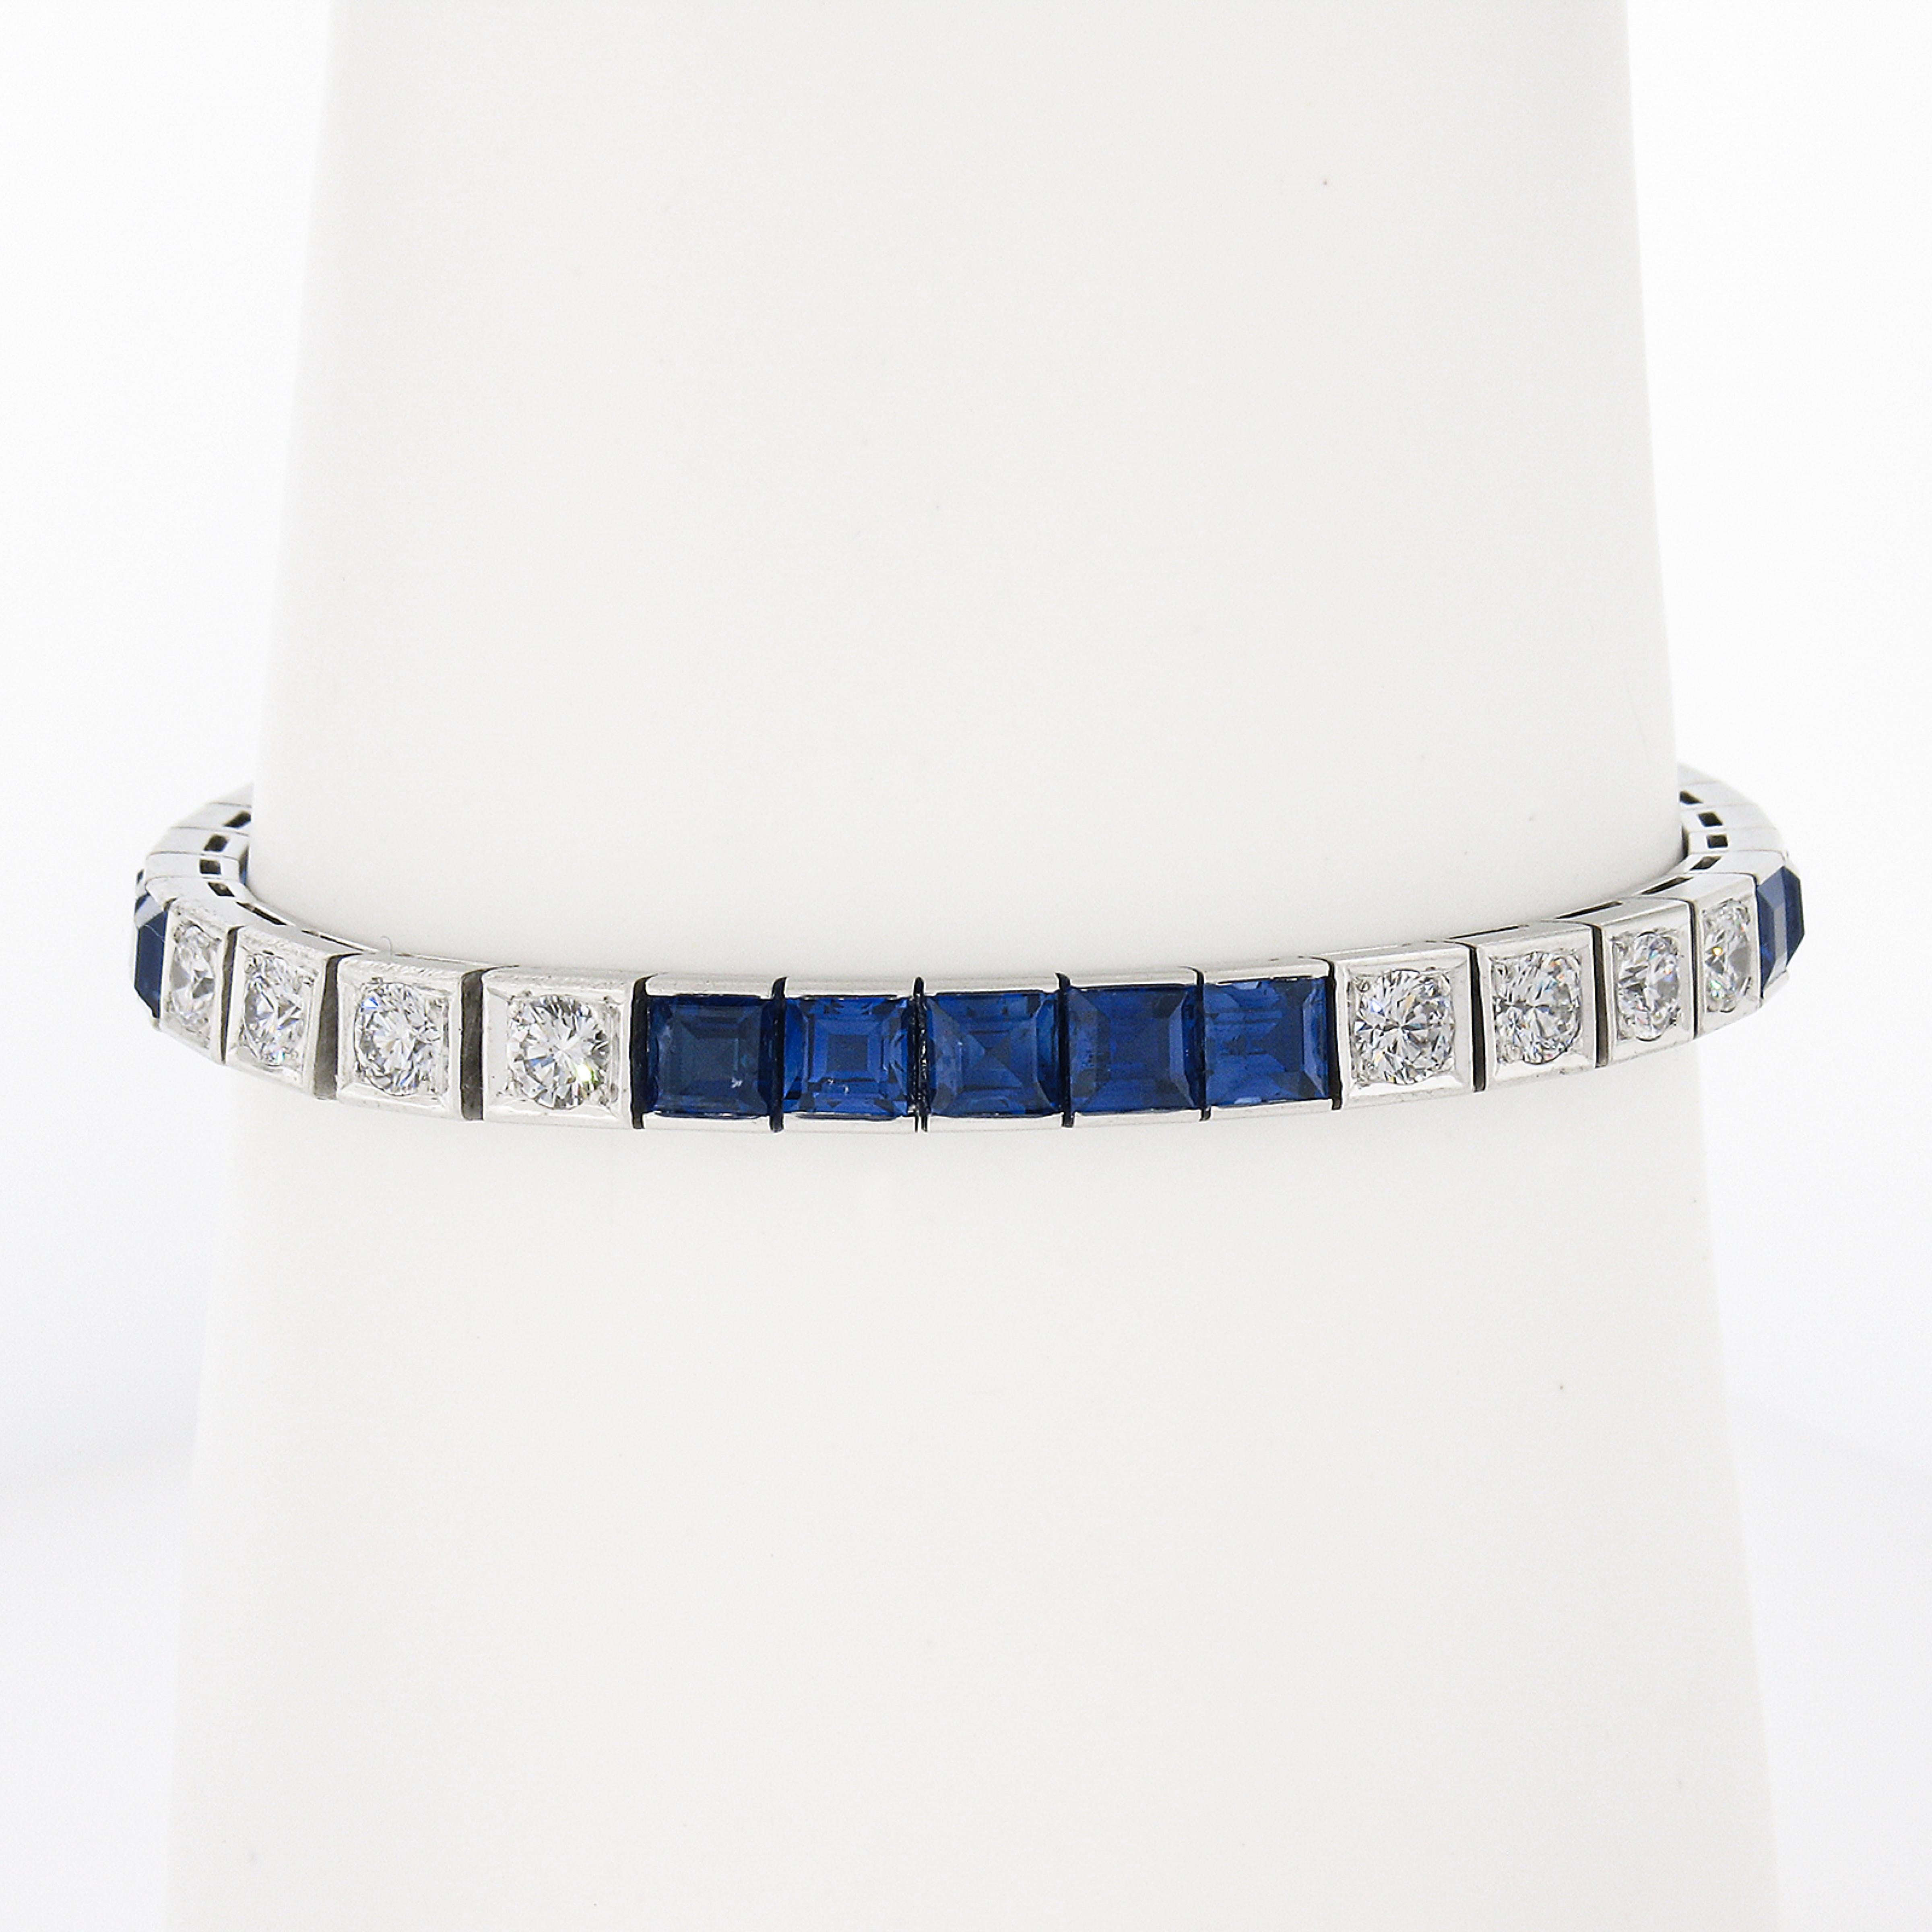 This magnificent vintage line tennis bracelet is crafted in solid platinum by Waslikoff & Son. It features very fine quality natural sapphire and diamond stones that are set in groups and alternate throughout the bracelet. These beautiful square